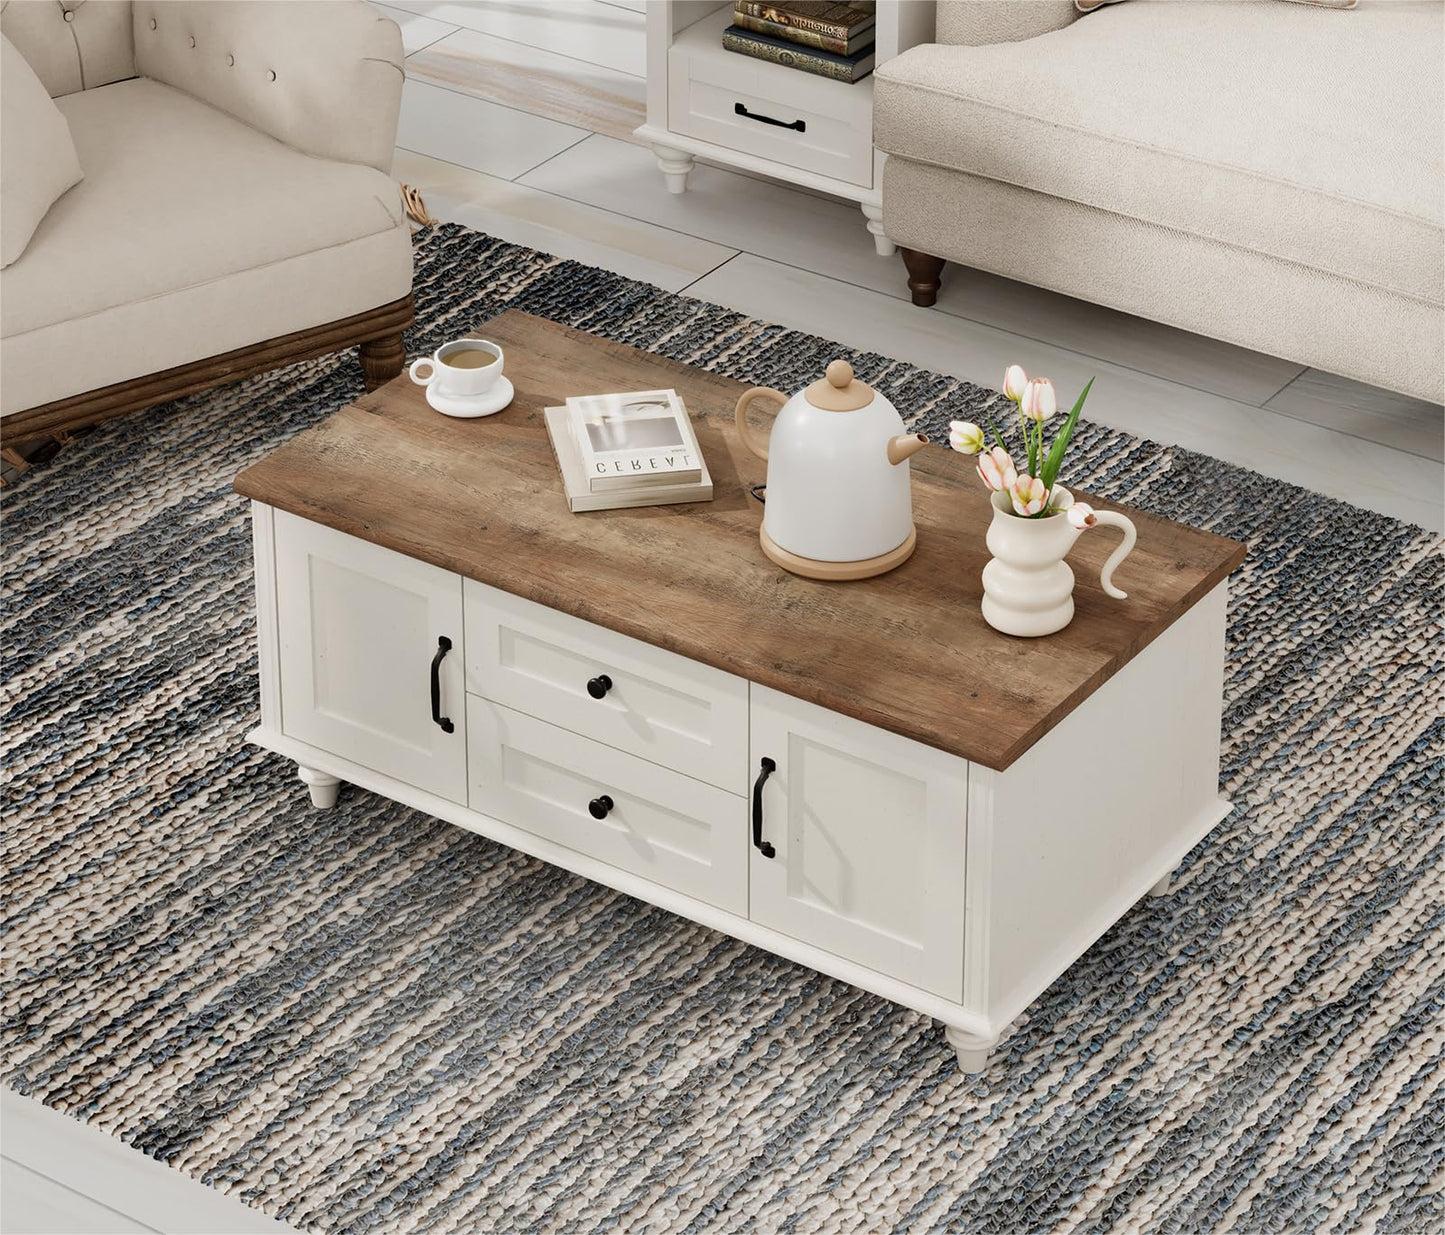 WAMPAT Modern Coffee Table with Storage Cabinet, White Coffee Tables for Living Room, Wood Rectangle Center Table with Drawer, Rustic Tea Table for Home, White